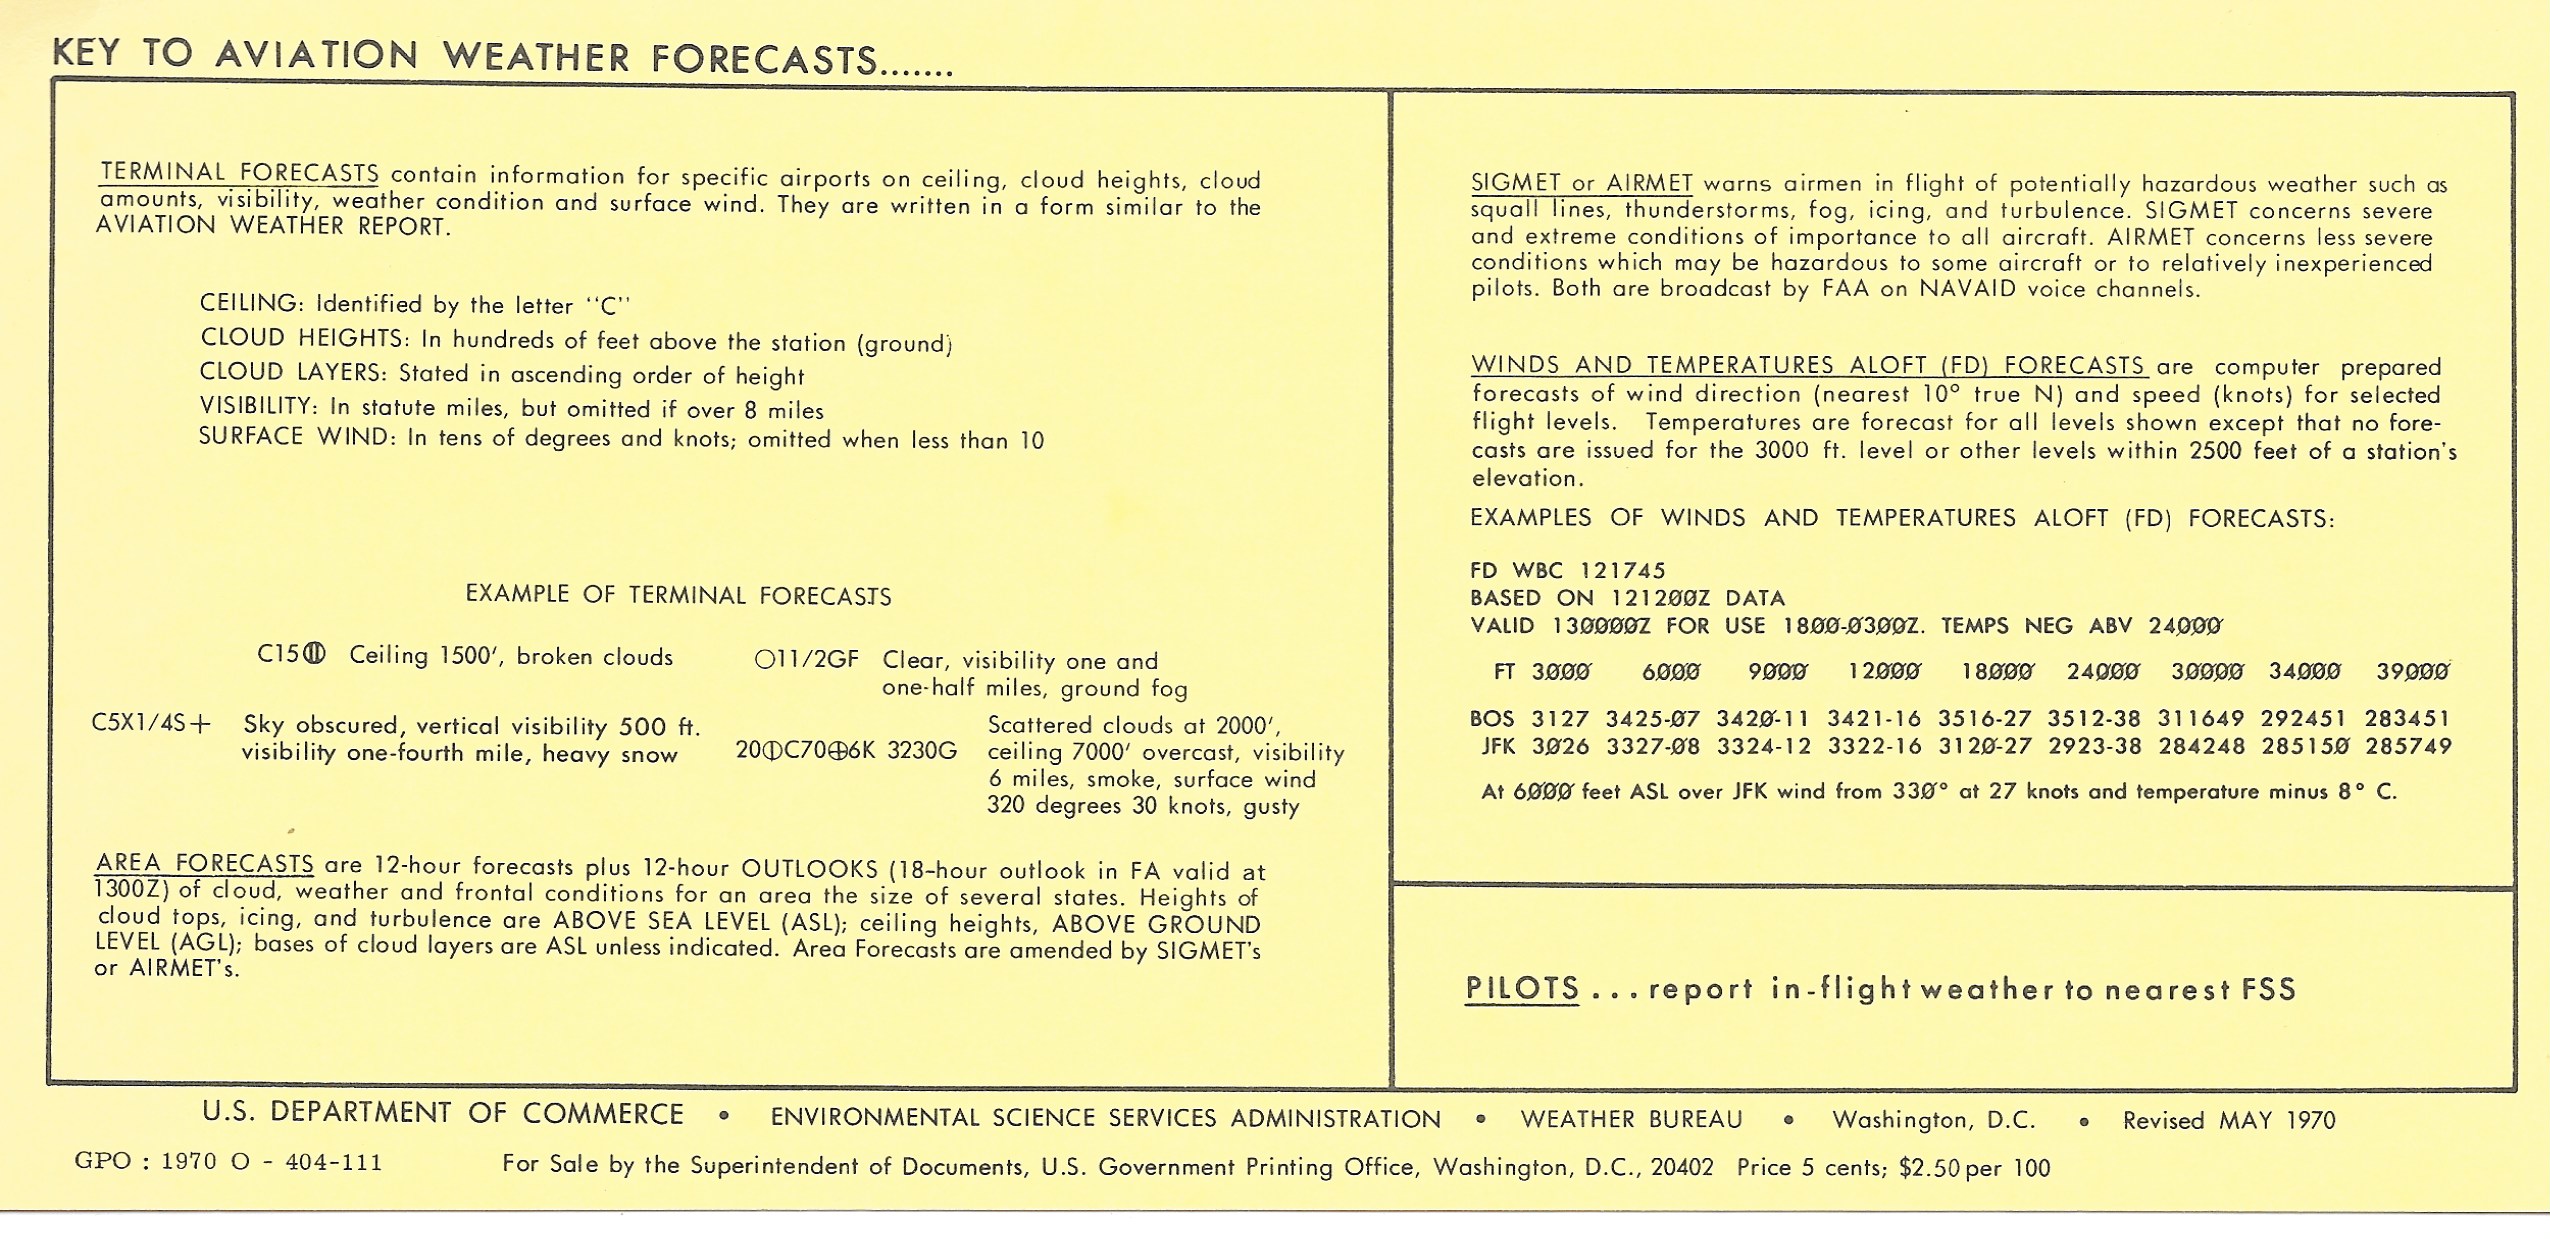 aviation weather report 1970 - back